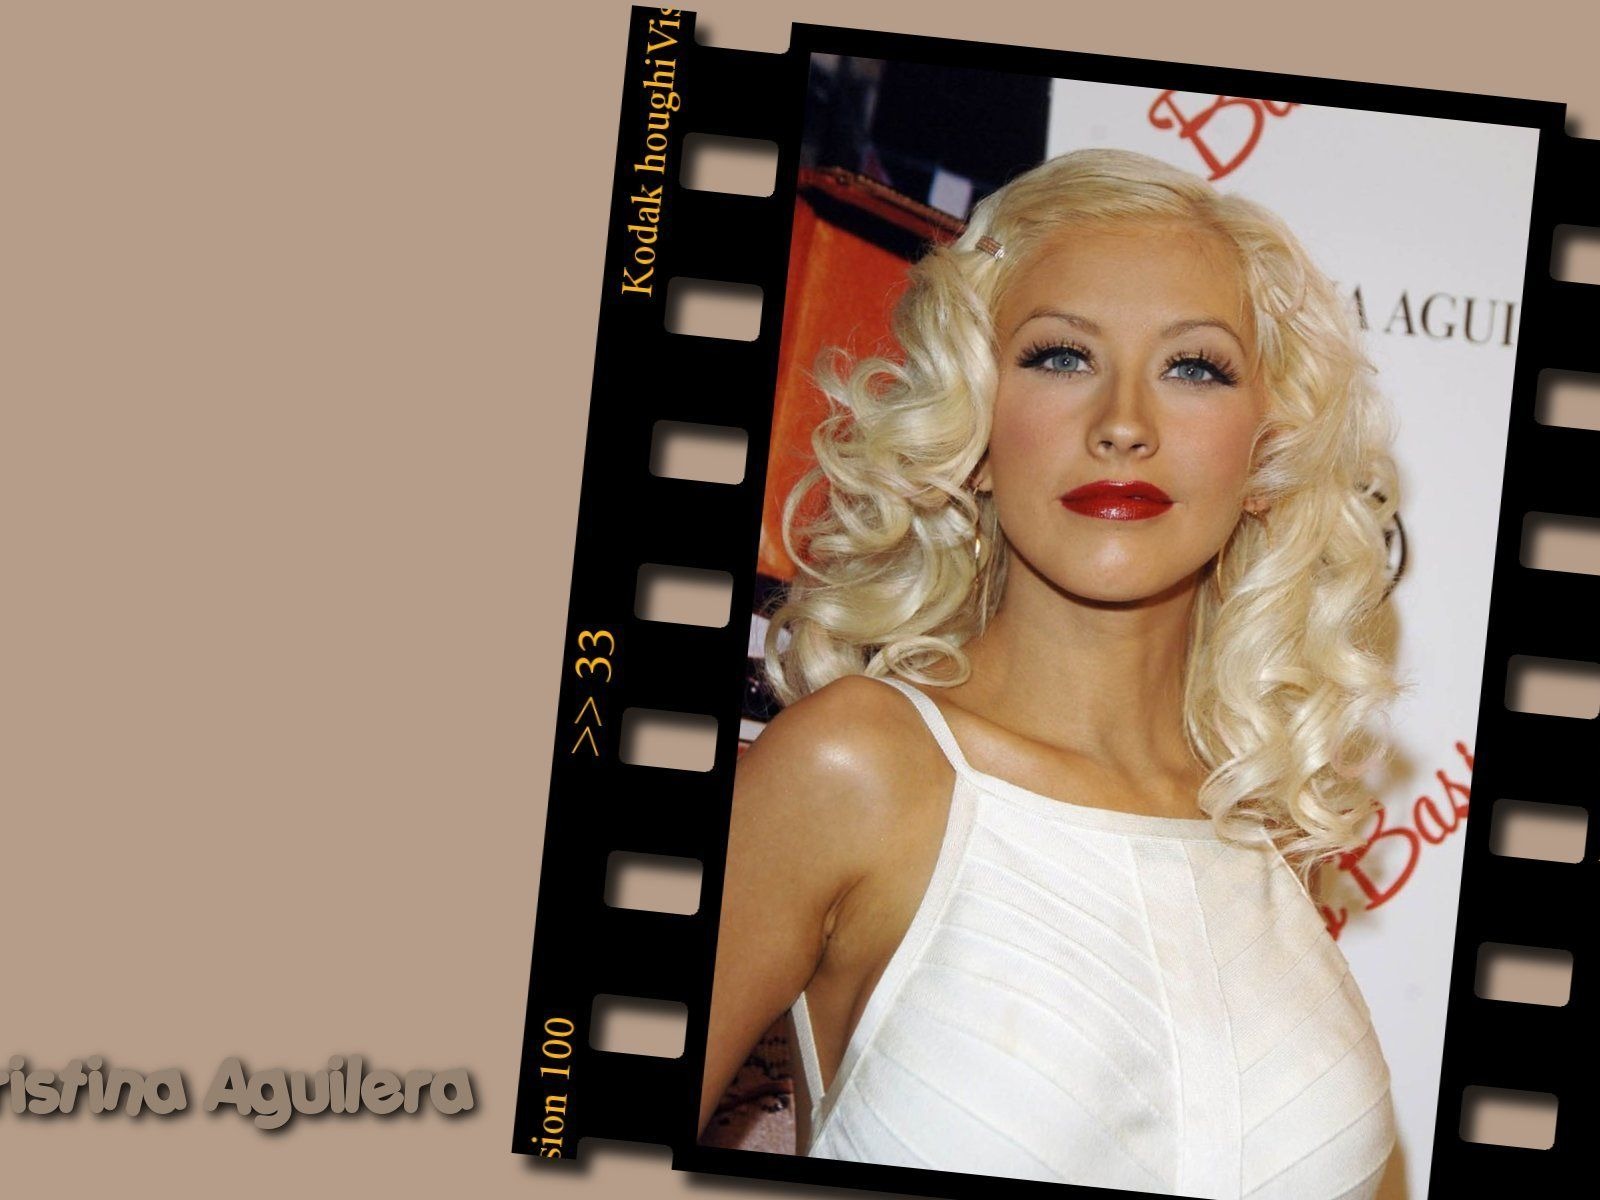 Christina Aguilera #008 - 1600x1200 Wallpapers Pictures Photos Images